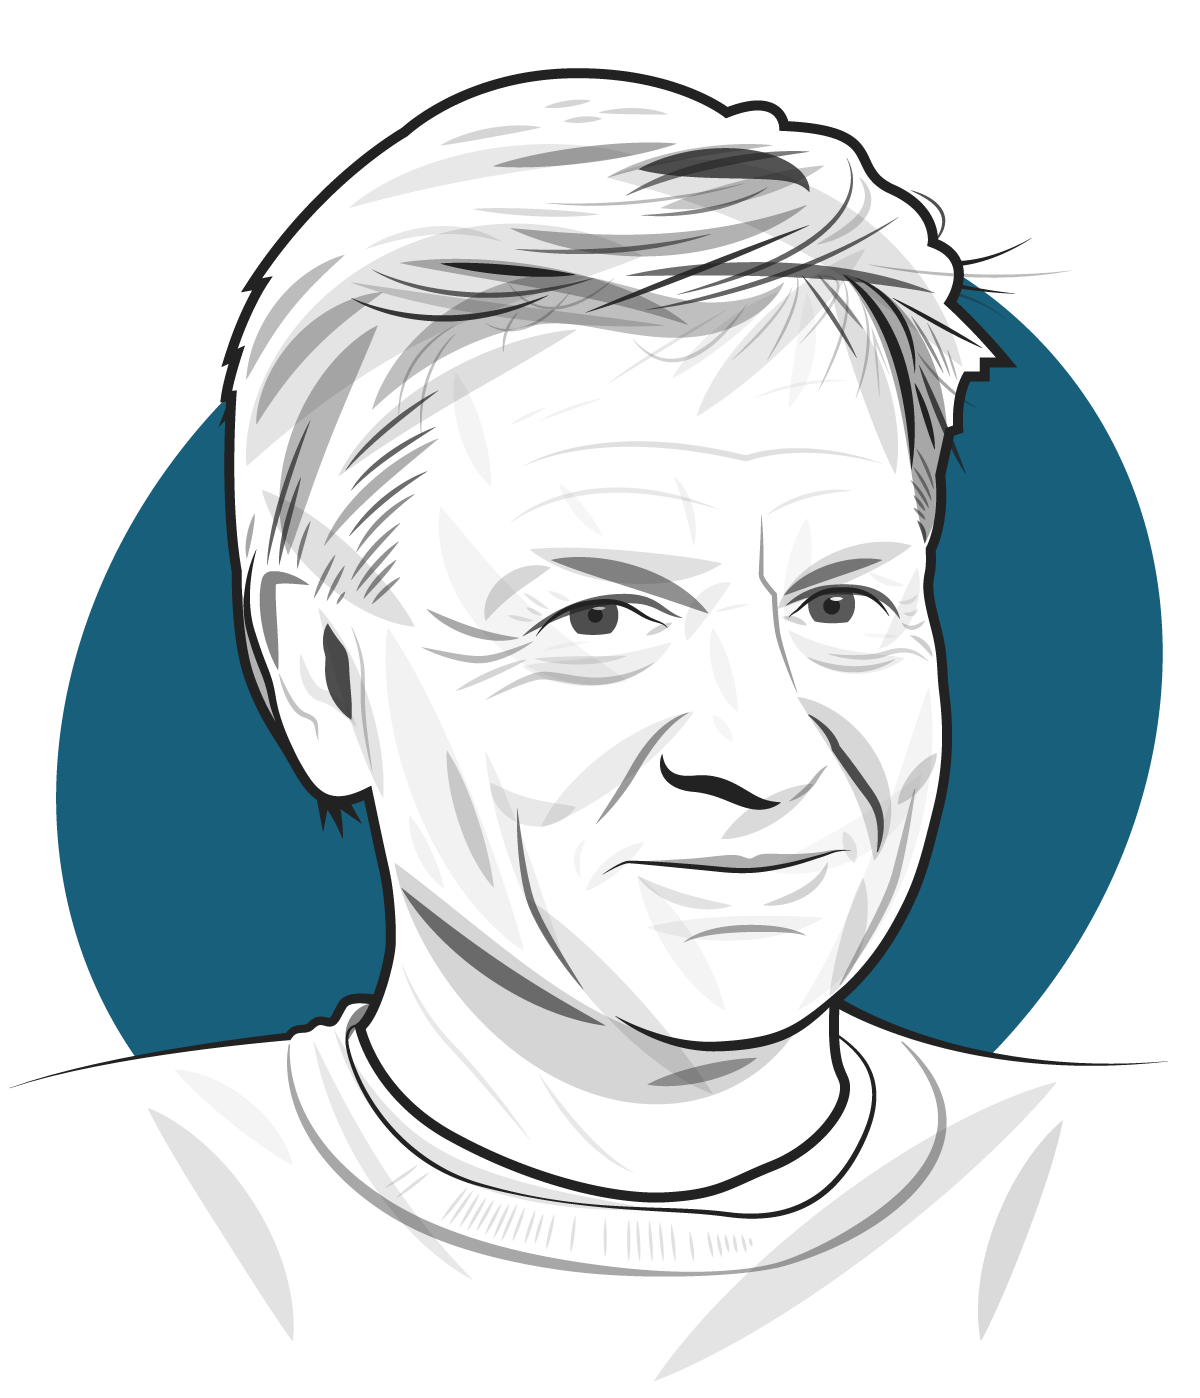 Michael Lewis on A's 'Moneyball' legacy